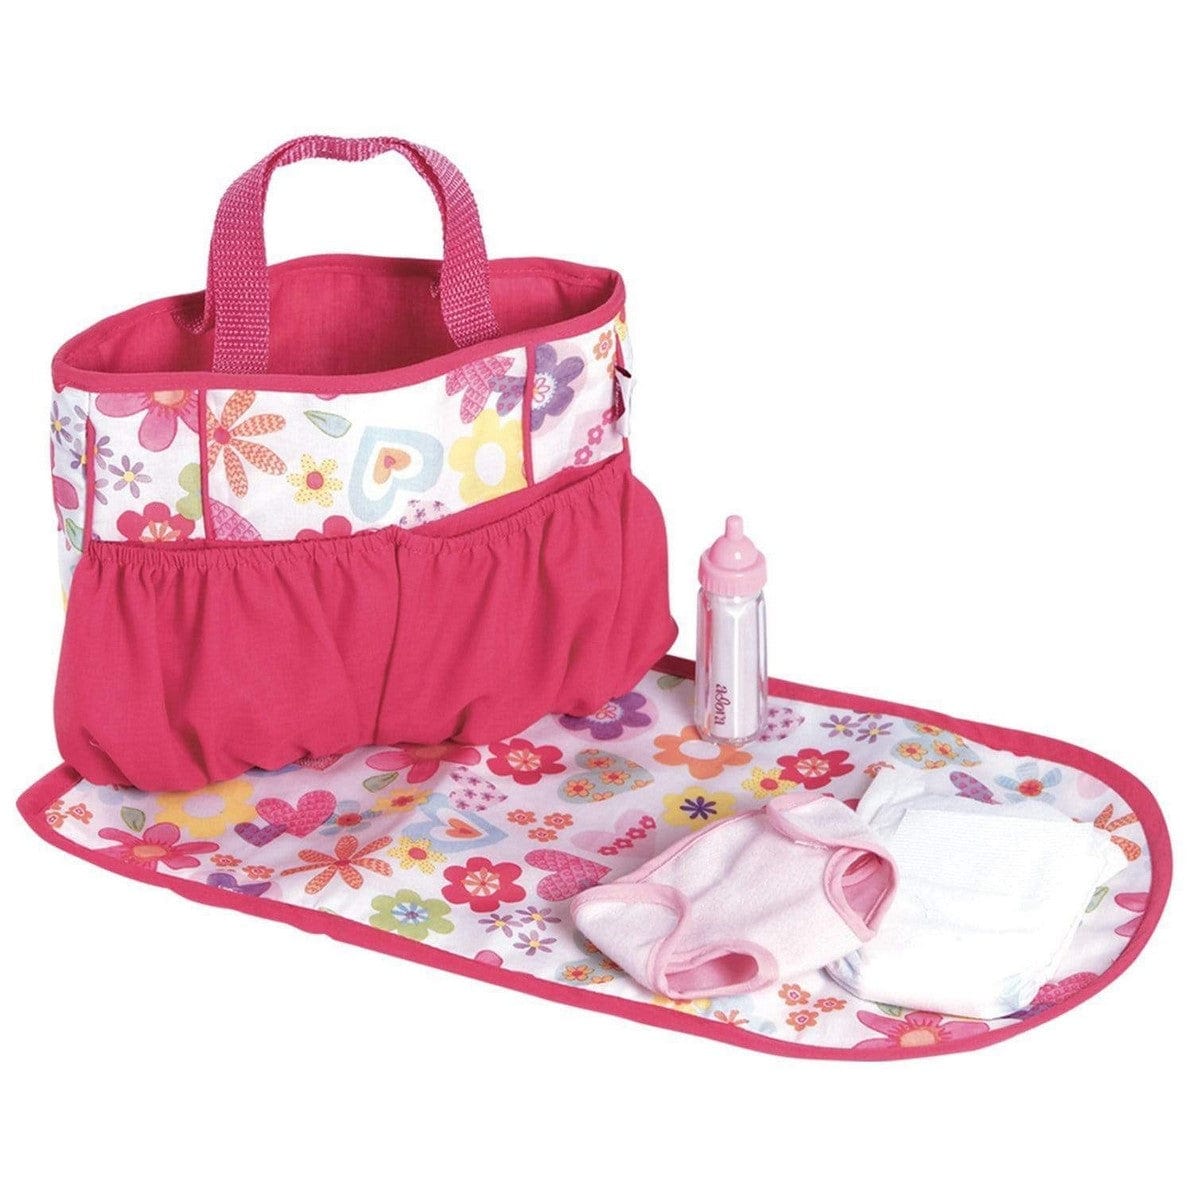 Adora Toys Soft Dolls Diaper Bag with Accessories